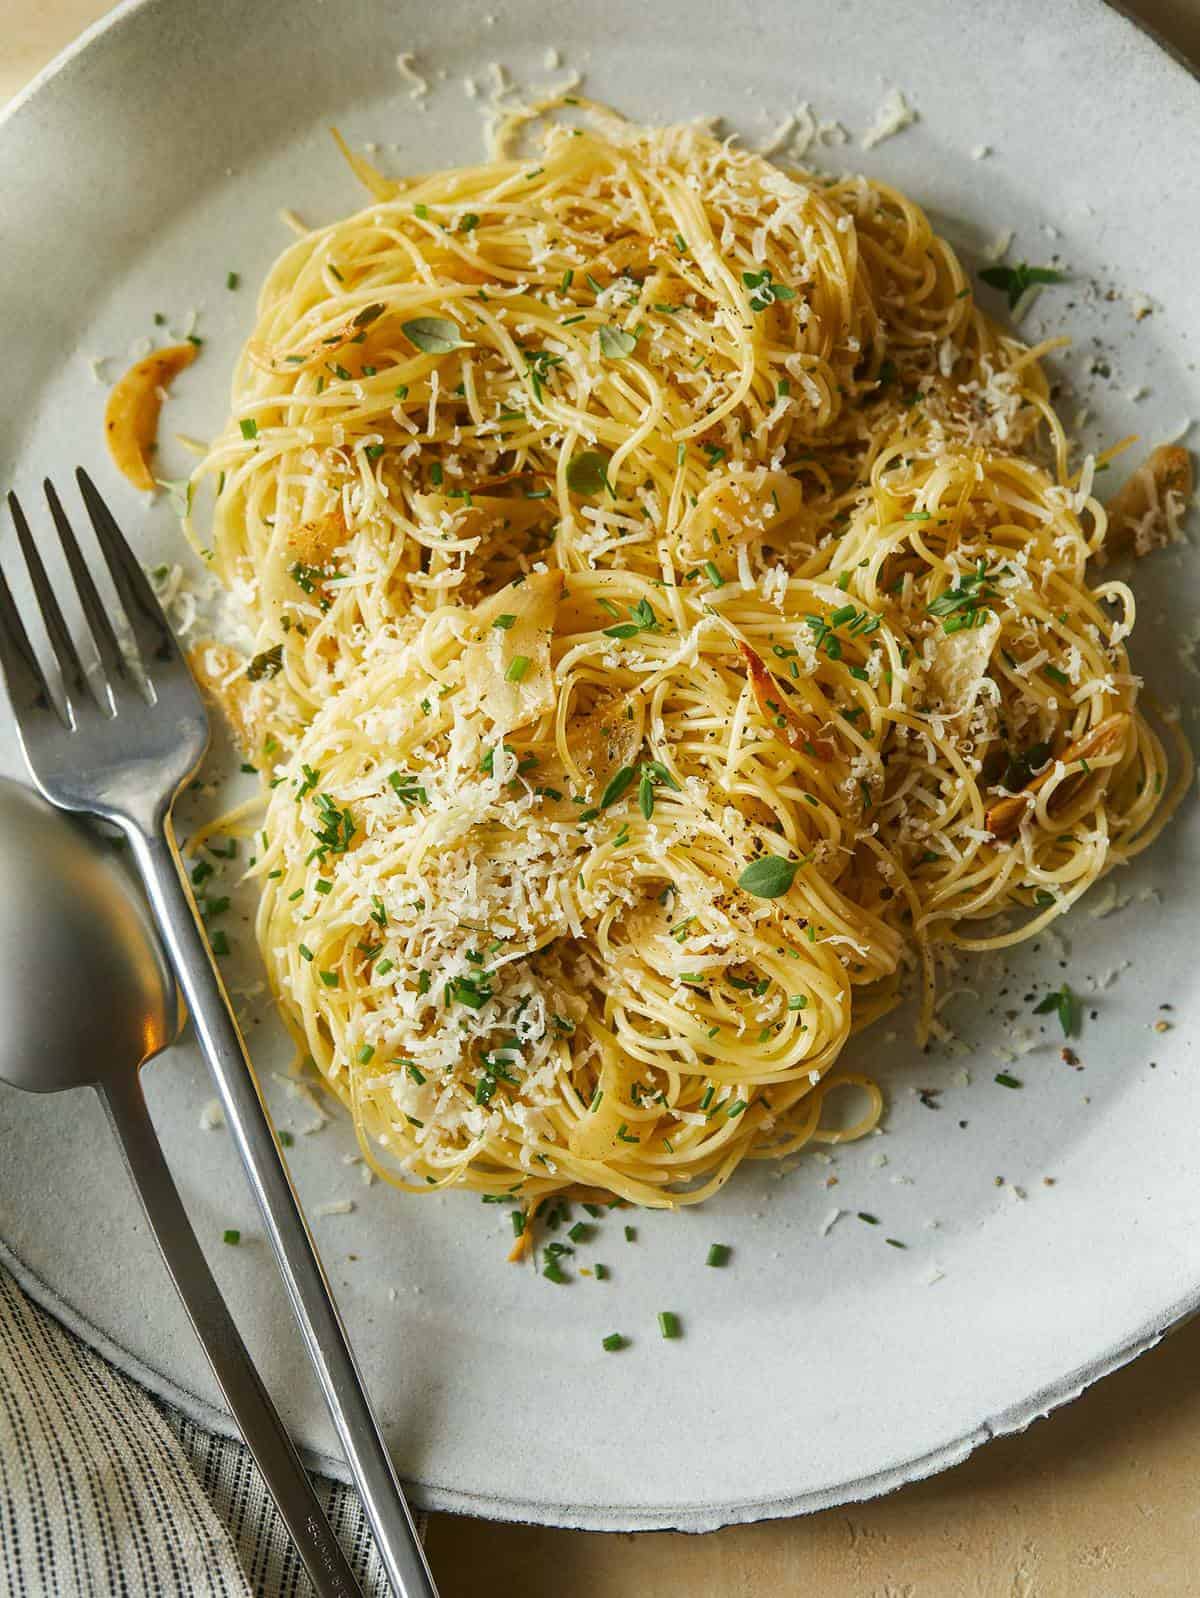 Capellini with Garlic, Lemon and Parmesan | Spoon Fork Bacon